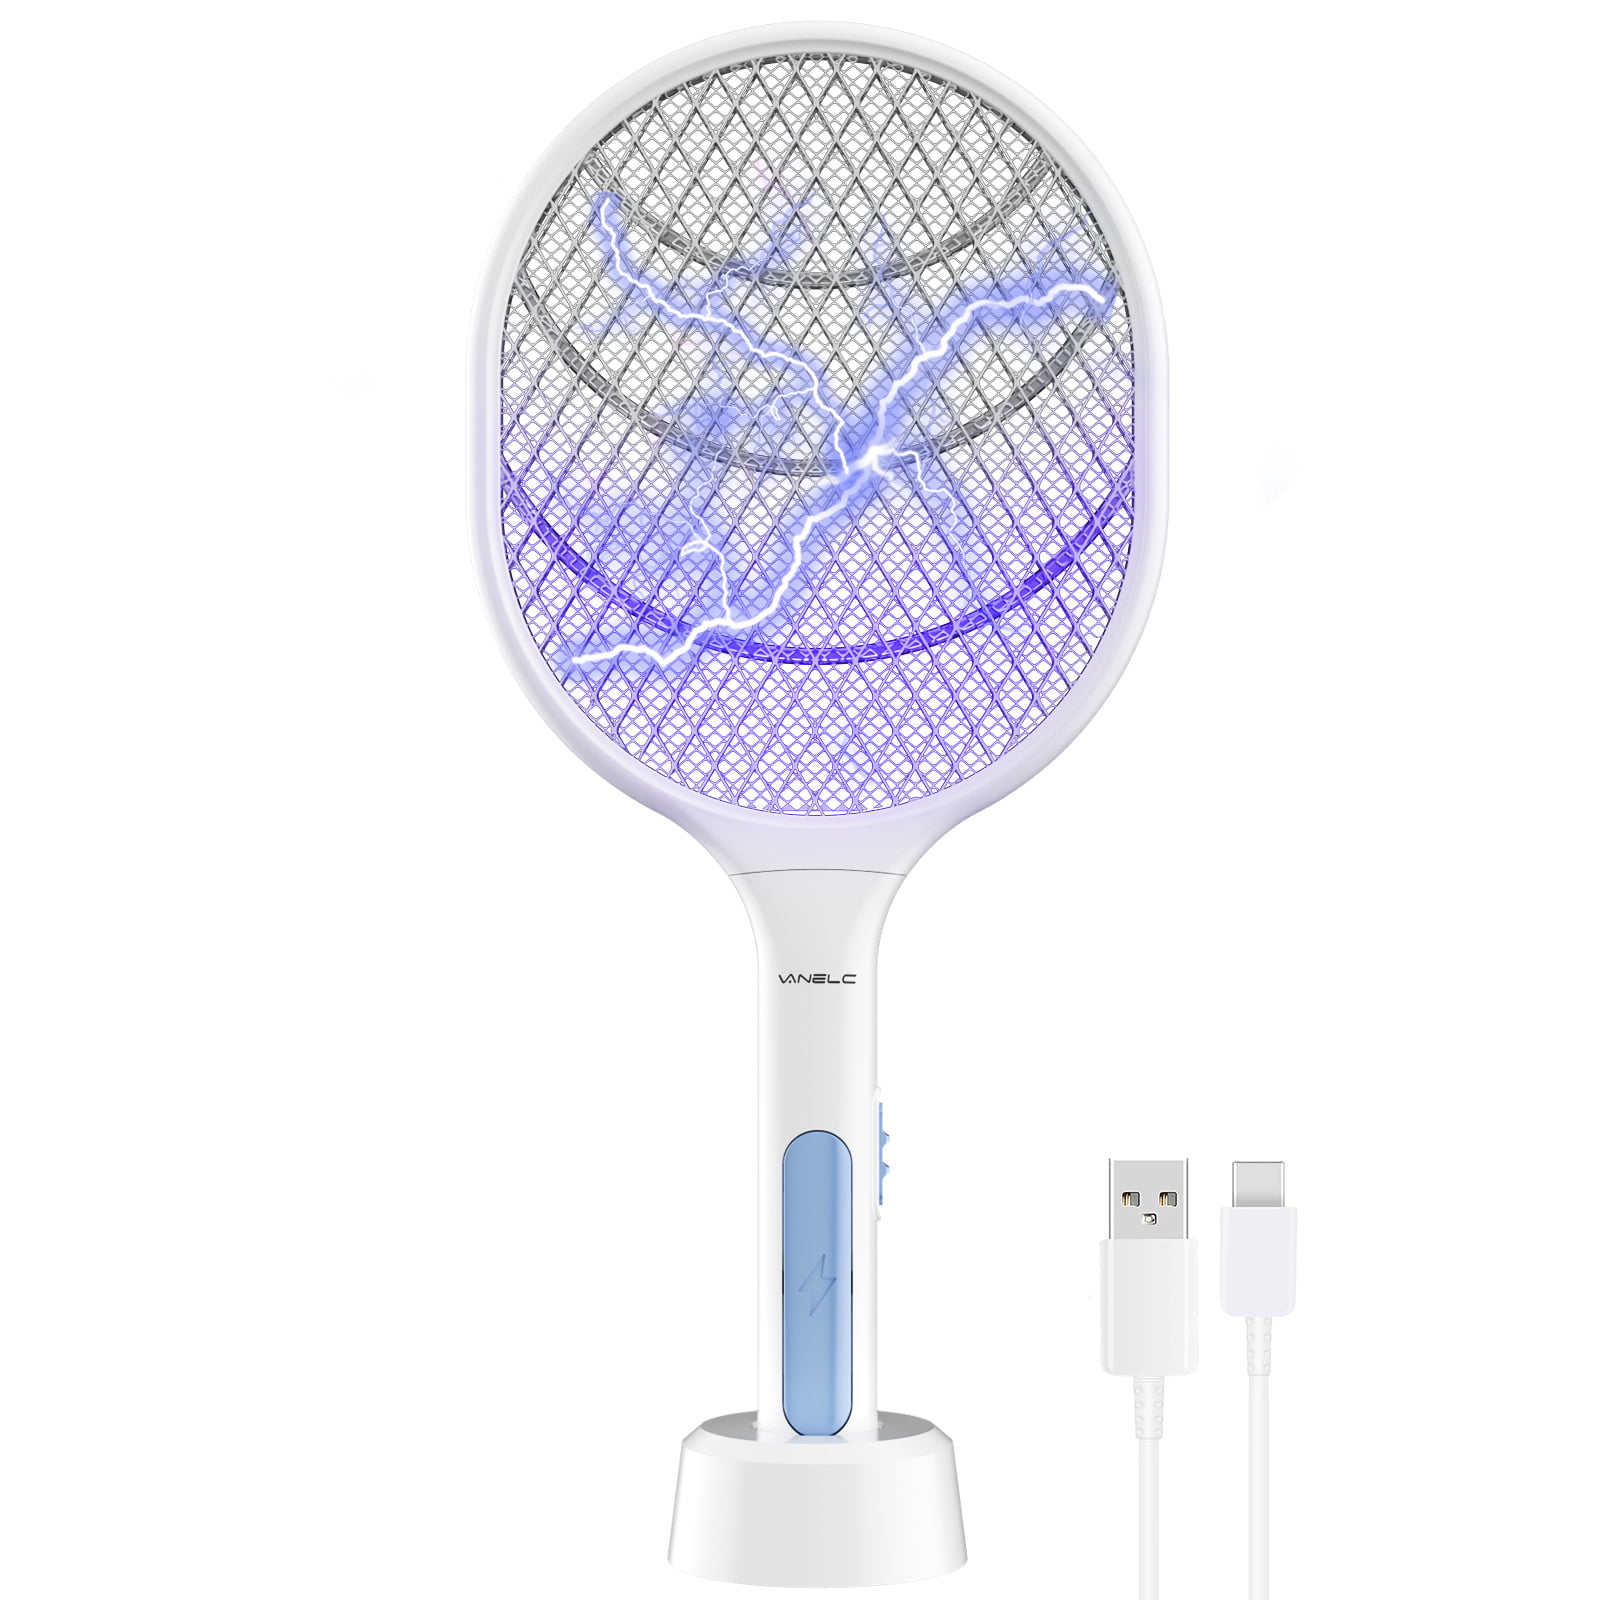 2-IN-1 ELECTRIC SWATTER & NIGHT MOSQUITO KILLING LAMP USB 1200mAh Rechargeable 